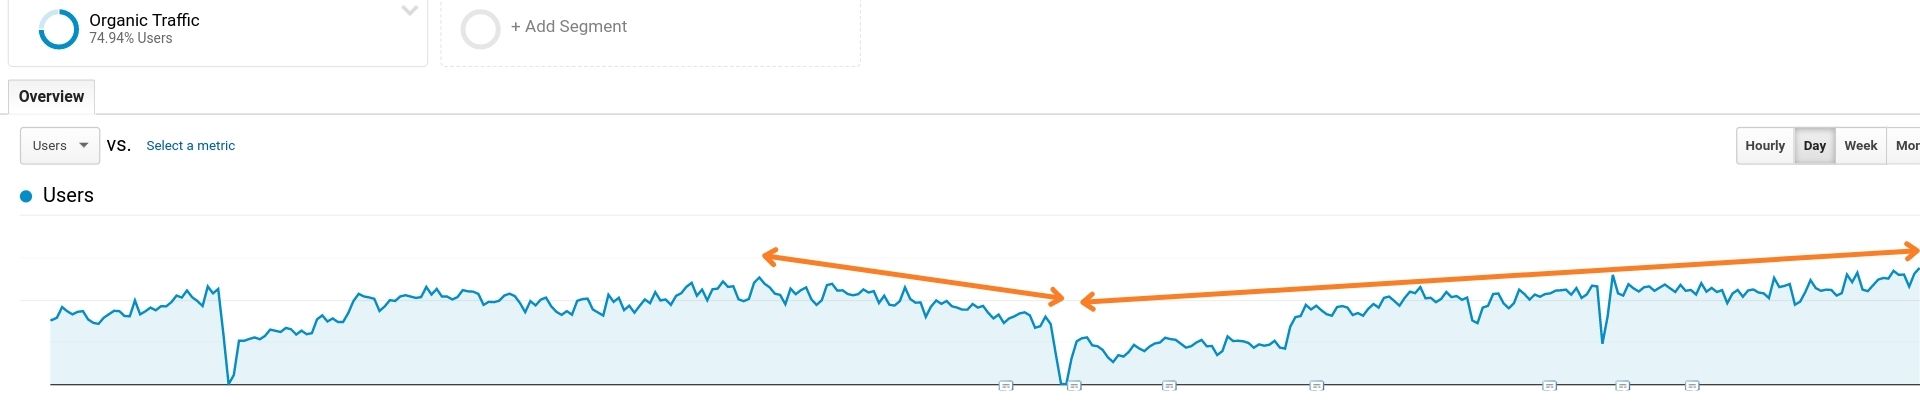 Recovery from a penalty that was hurting organic traffic on a cannabis eComm website.